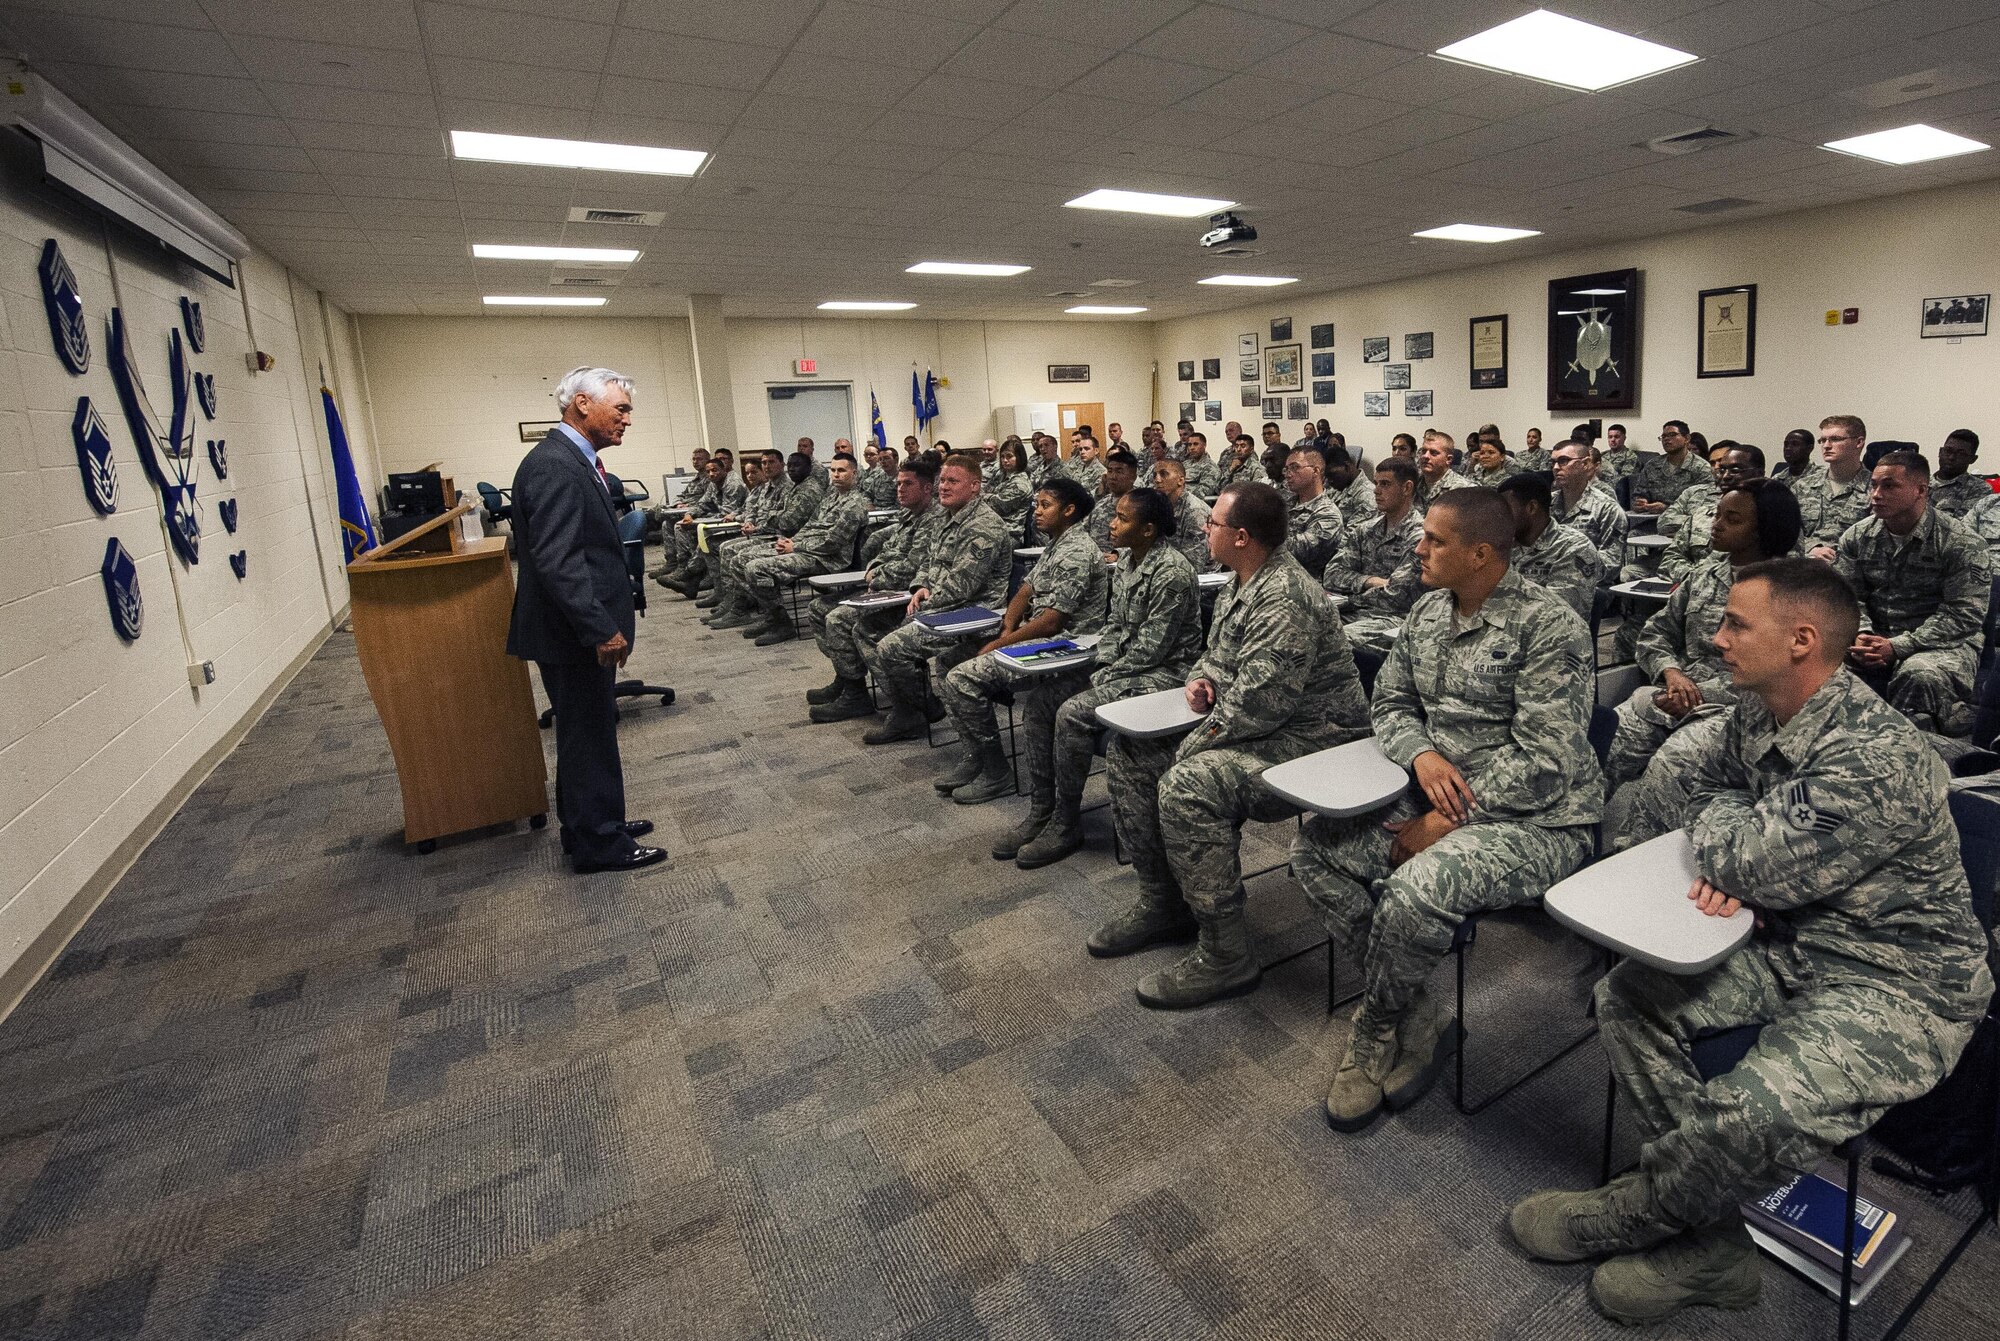 U.S. Air Force Lt. Col. (Ret.) Barry Bridger, former 43rd Tactical Fighter Squadron F-4 Phantom aircraft commander, shares his story with Airmen Leadership School students at Joint Base Langley-Eustis, Va., Sept. 15, 2016. Bridger also ran the first lap of the 24-hour Prisoner of War/Missing in Action run and was the guest speaker for the POW/MIA closing ceremony. He was held captive with 500 other service members from 1967 until their release in 1973. (U.S. Air Force photo by Staff Sgt. Nick Wilson)